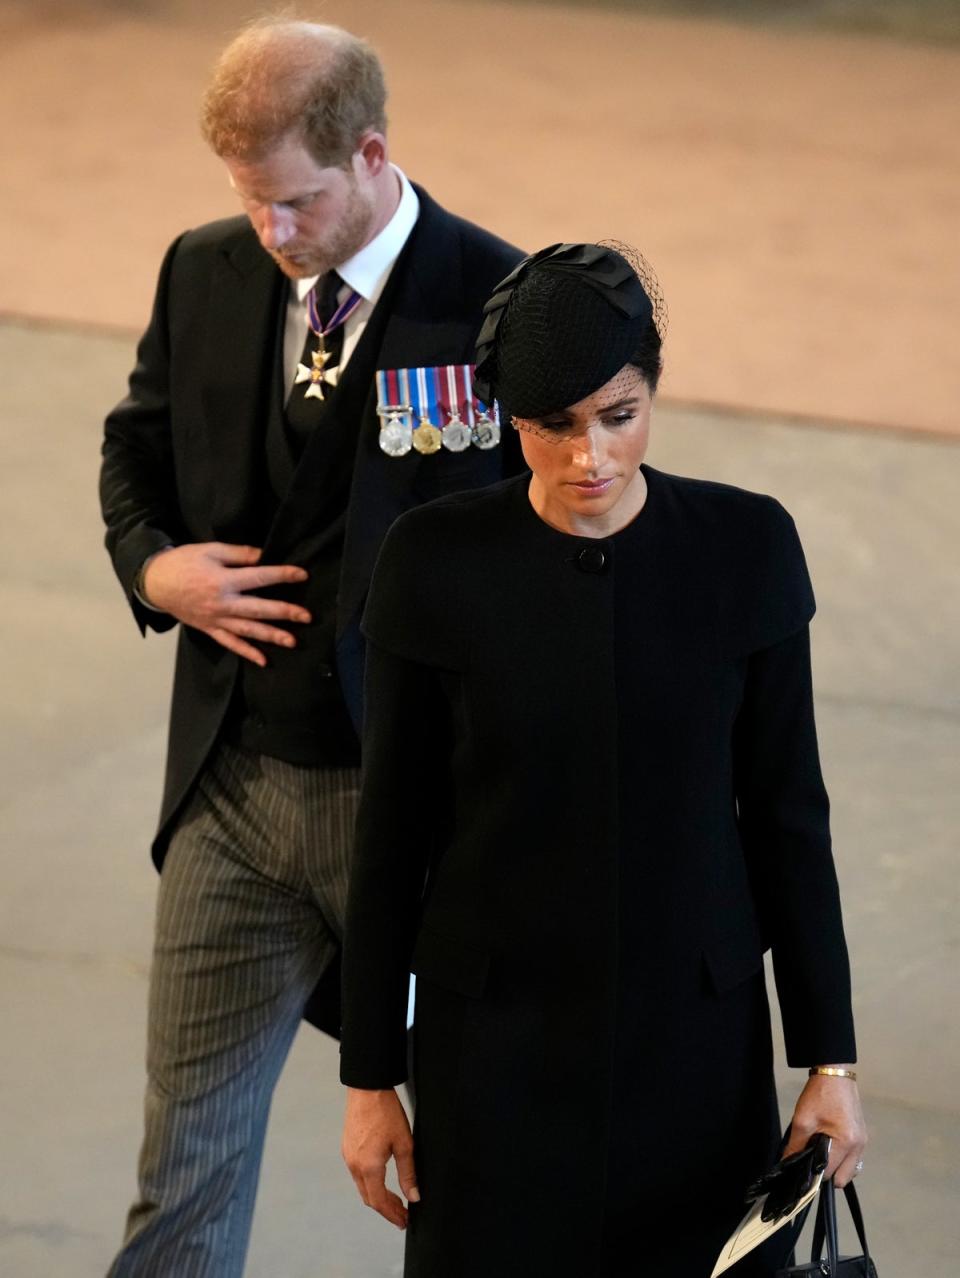 Prince Harry and Meghan Markle during the lying in state of Queen Elizabeth II on 14 September 2022 (Getty Images)